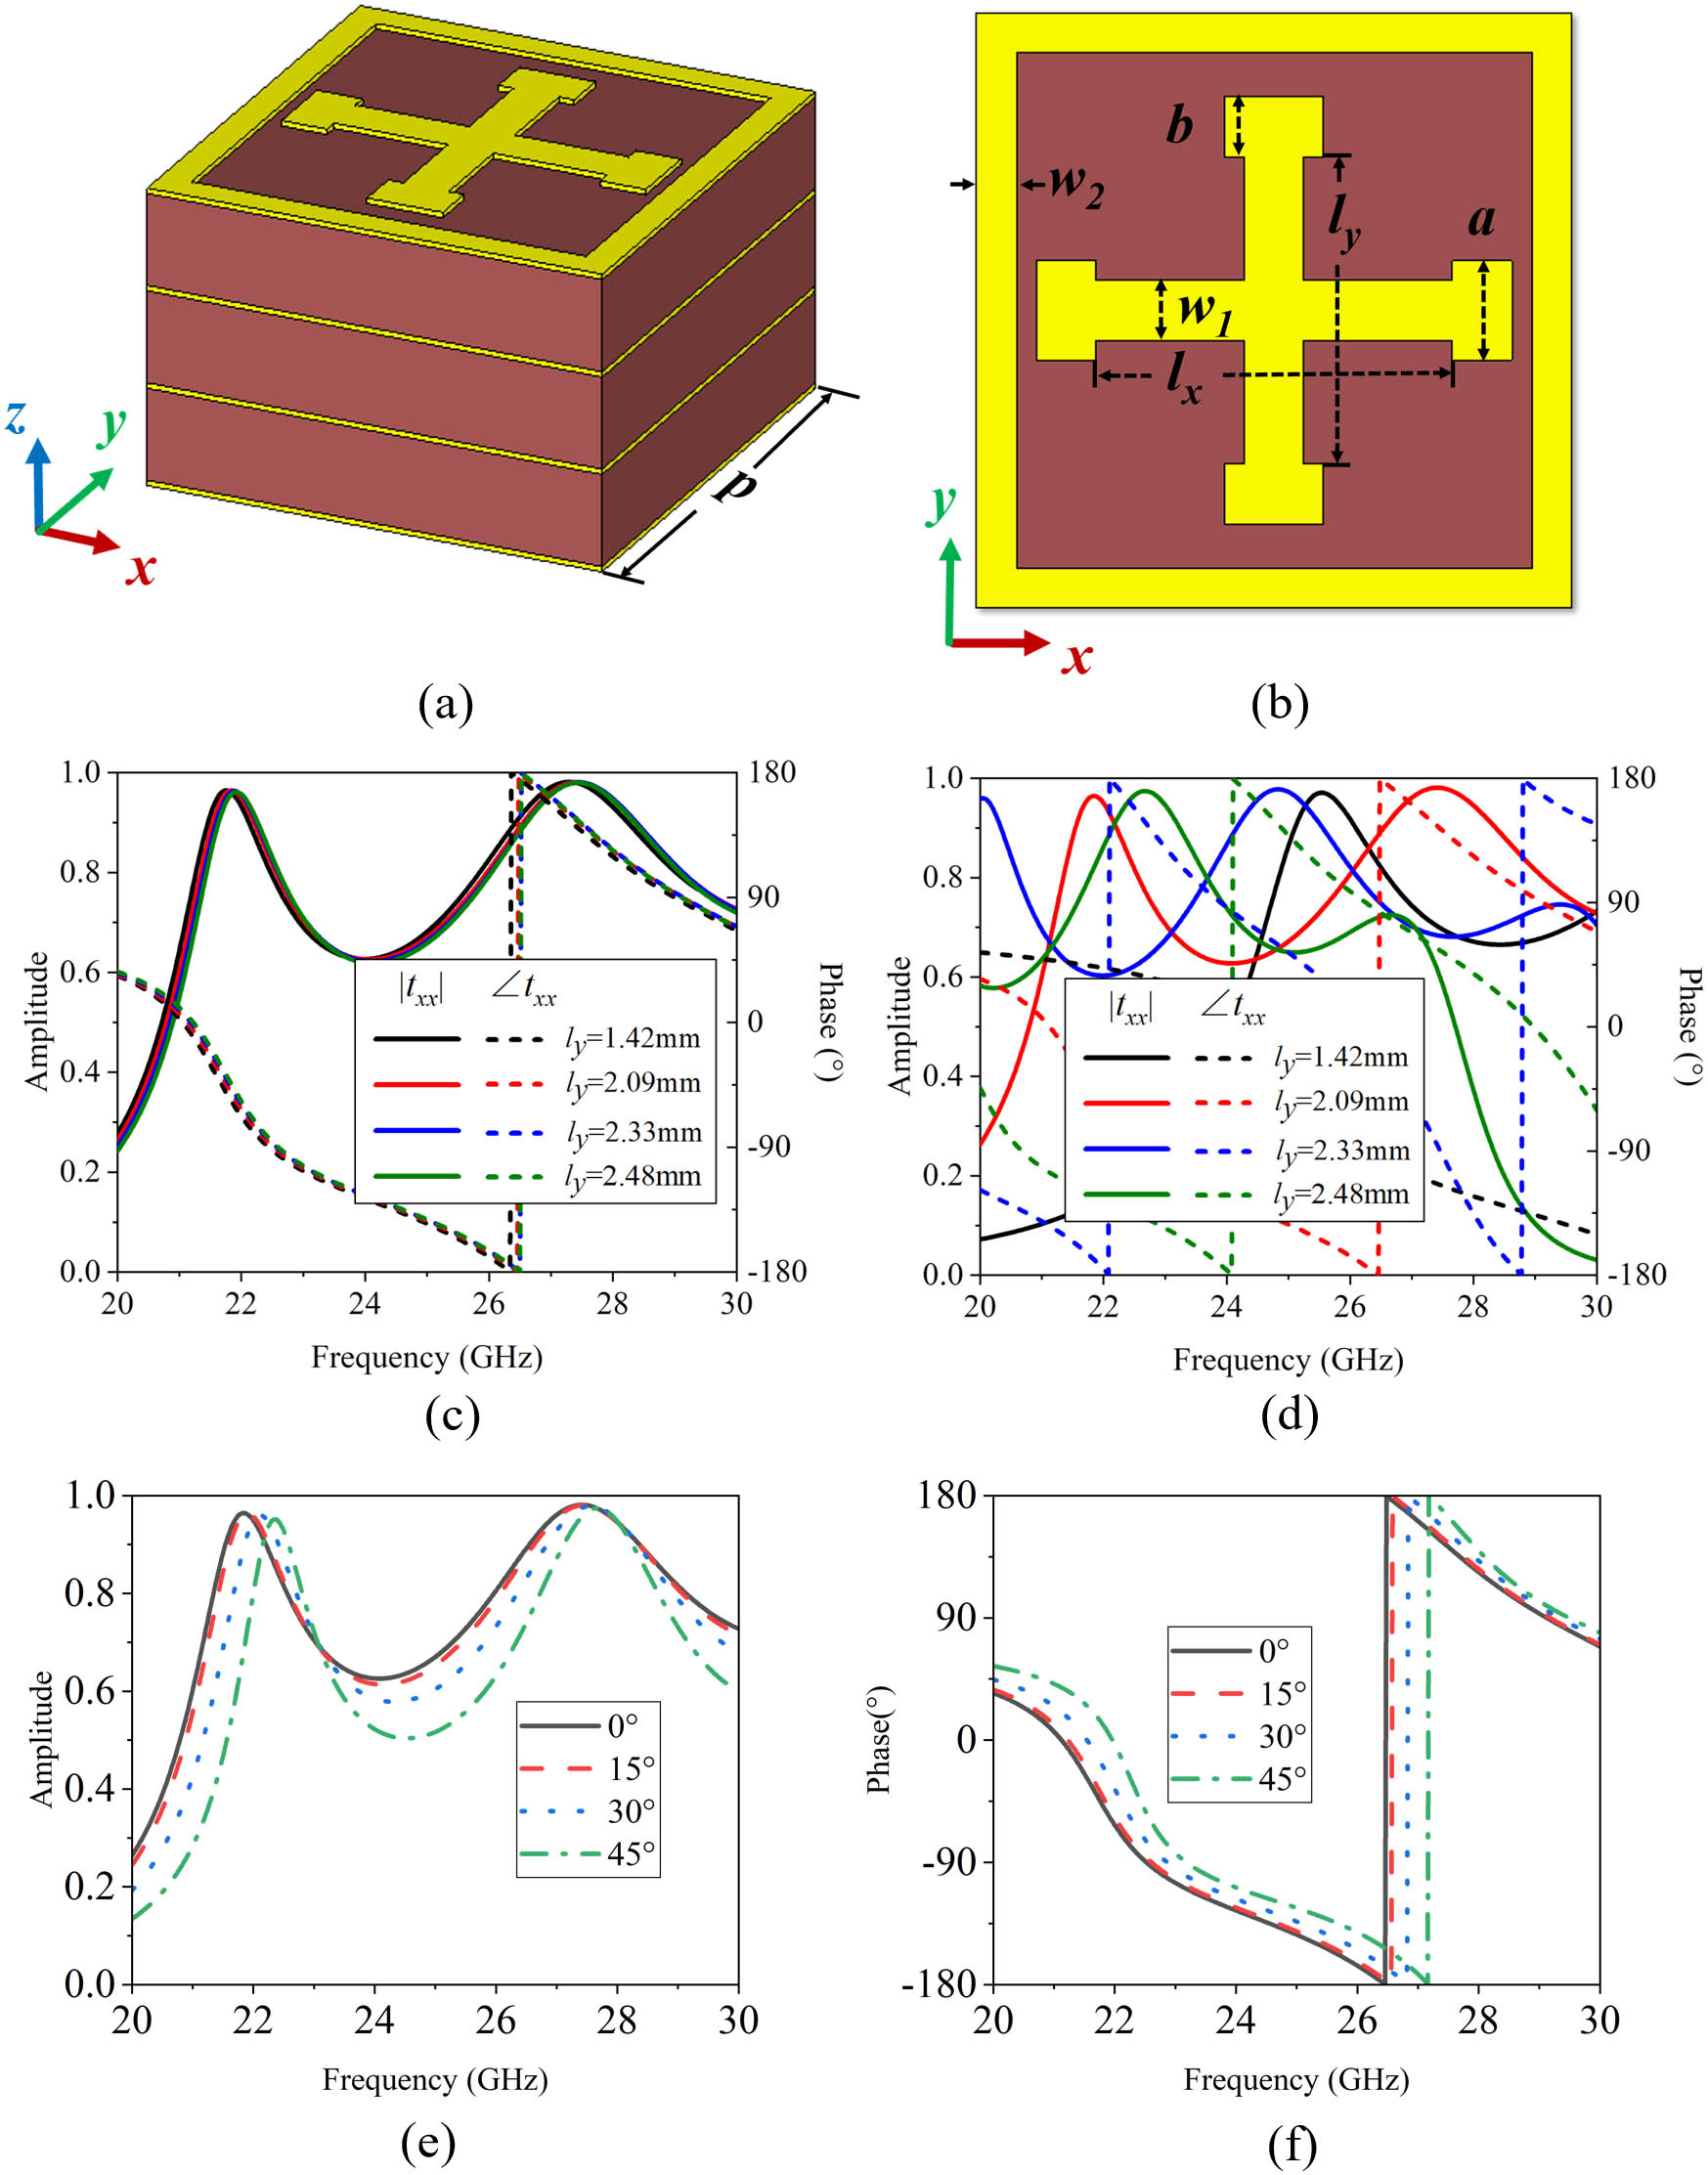 (a) 3D view and (b) top view of the designed metasurface unit. Magnitude and phase spectra of the meta-atoms with different lengths ly under (c) x-polarization excitation or (d) y-polarization excitation. The simulated (e) magnitude and (f) phase of the unit cell with lx=ly=2.09 mm under x-polarization excitation in different incident angles.